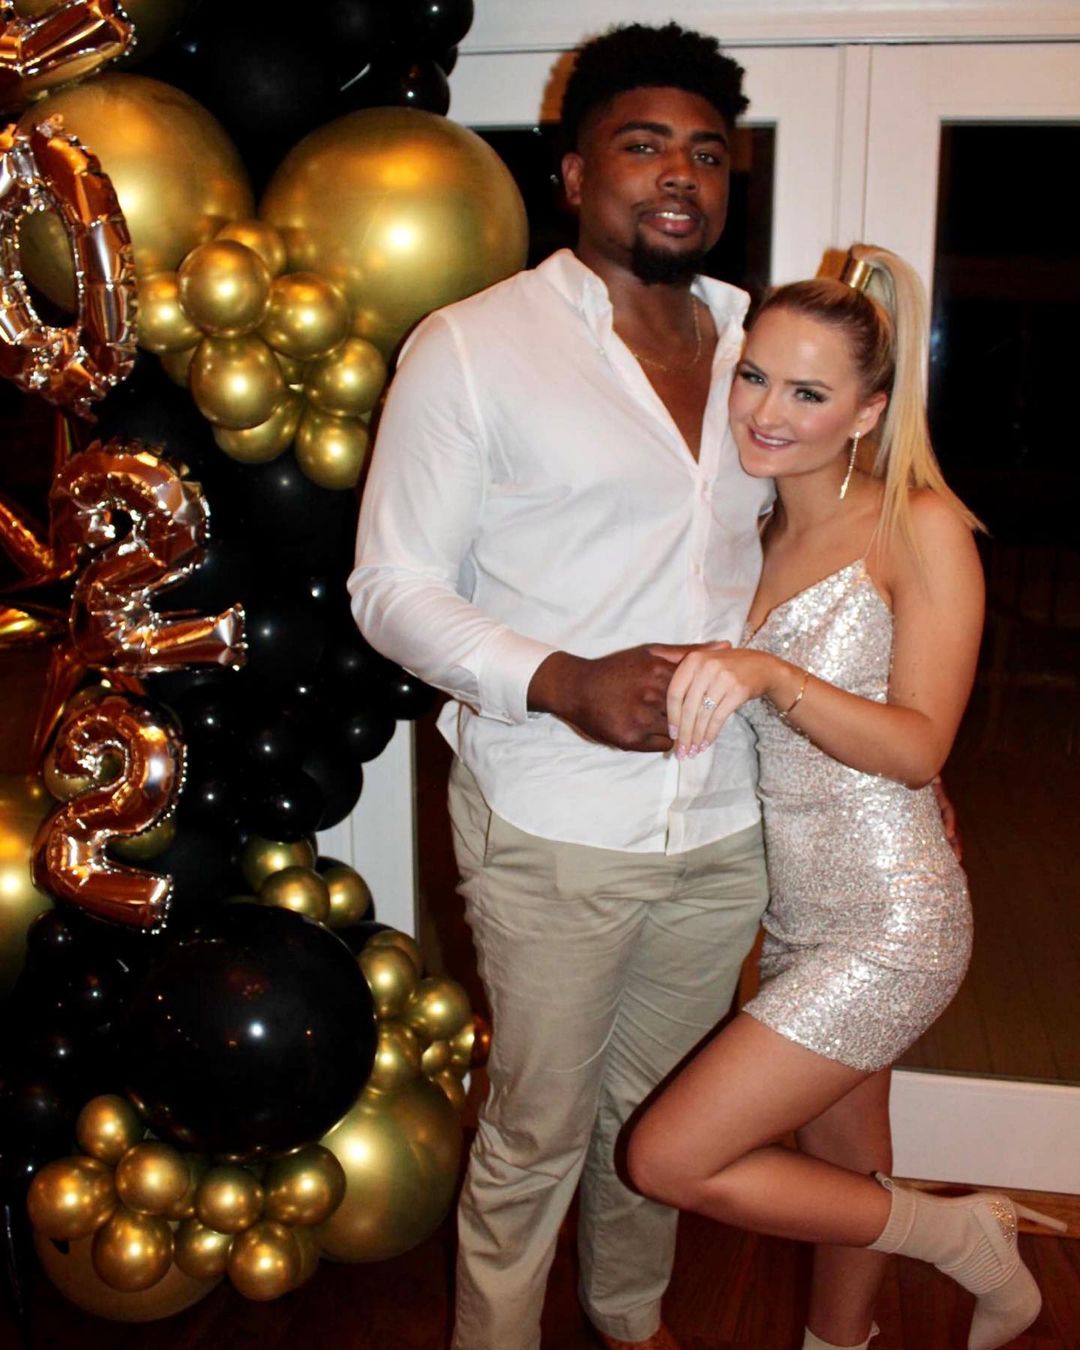 Treylon Burks proposed to his long-time girlfriend, Shelby Pearlman, after dating her for a decade